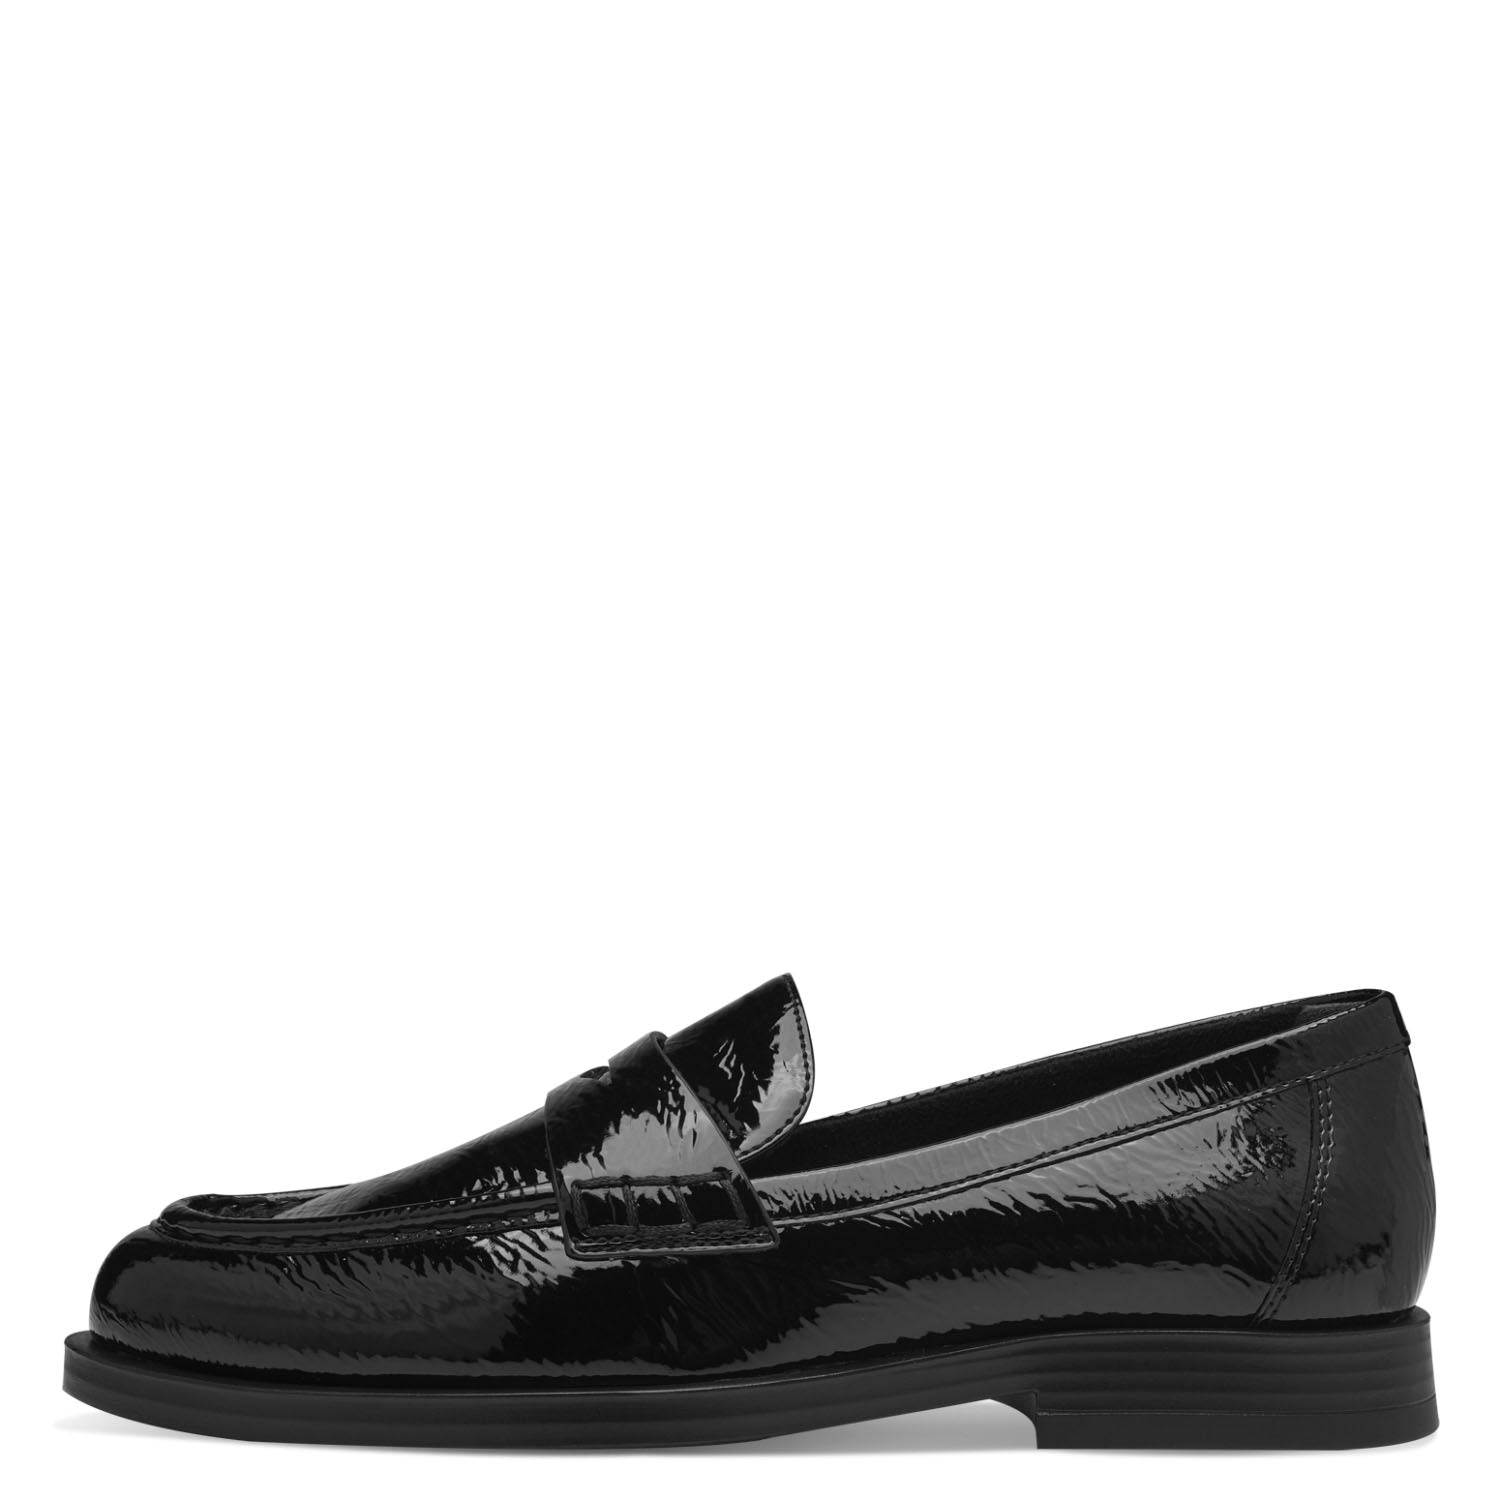 Front view of the Plain Black Patent Loafer